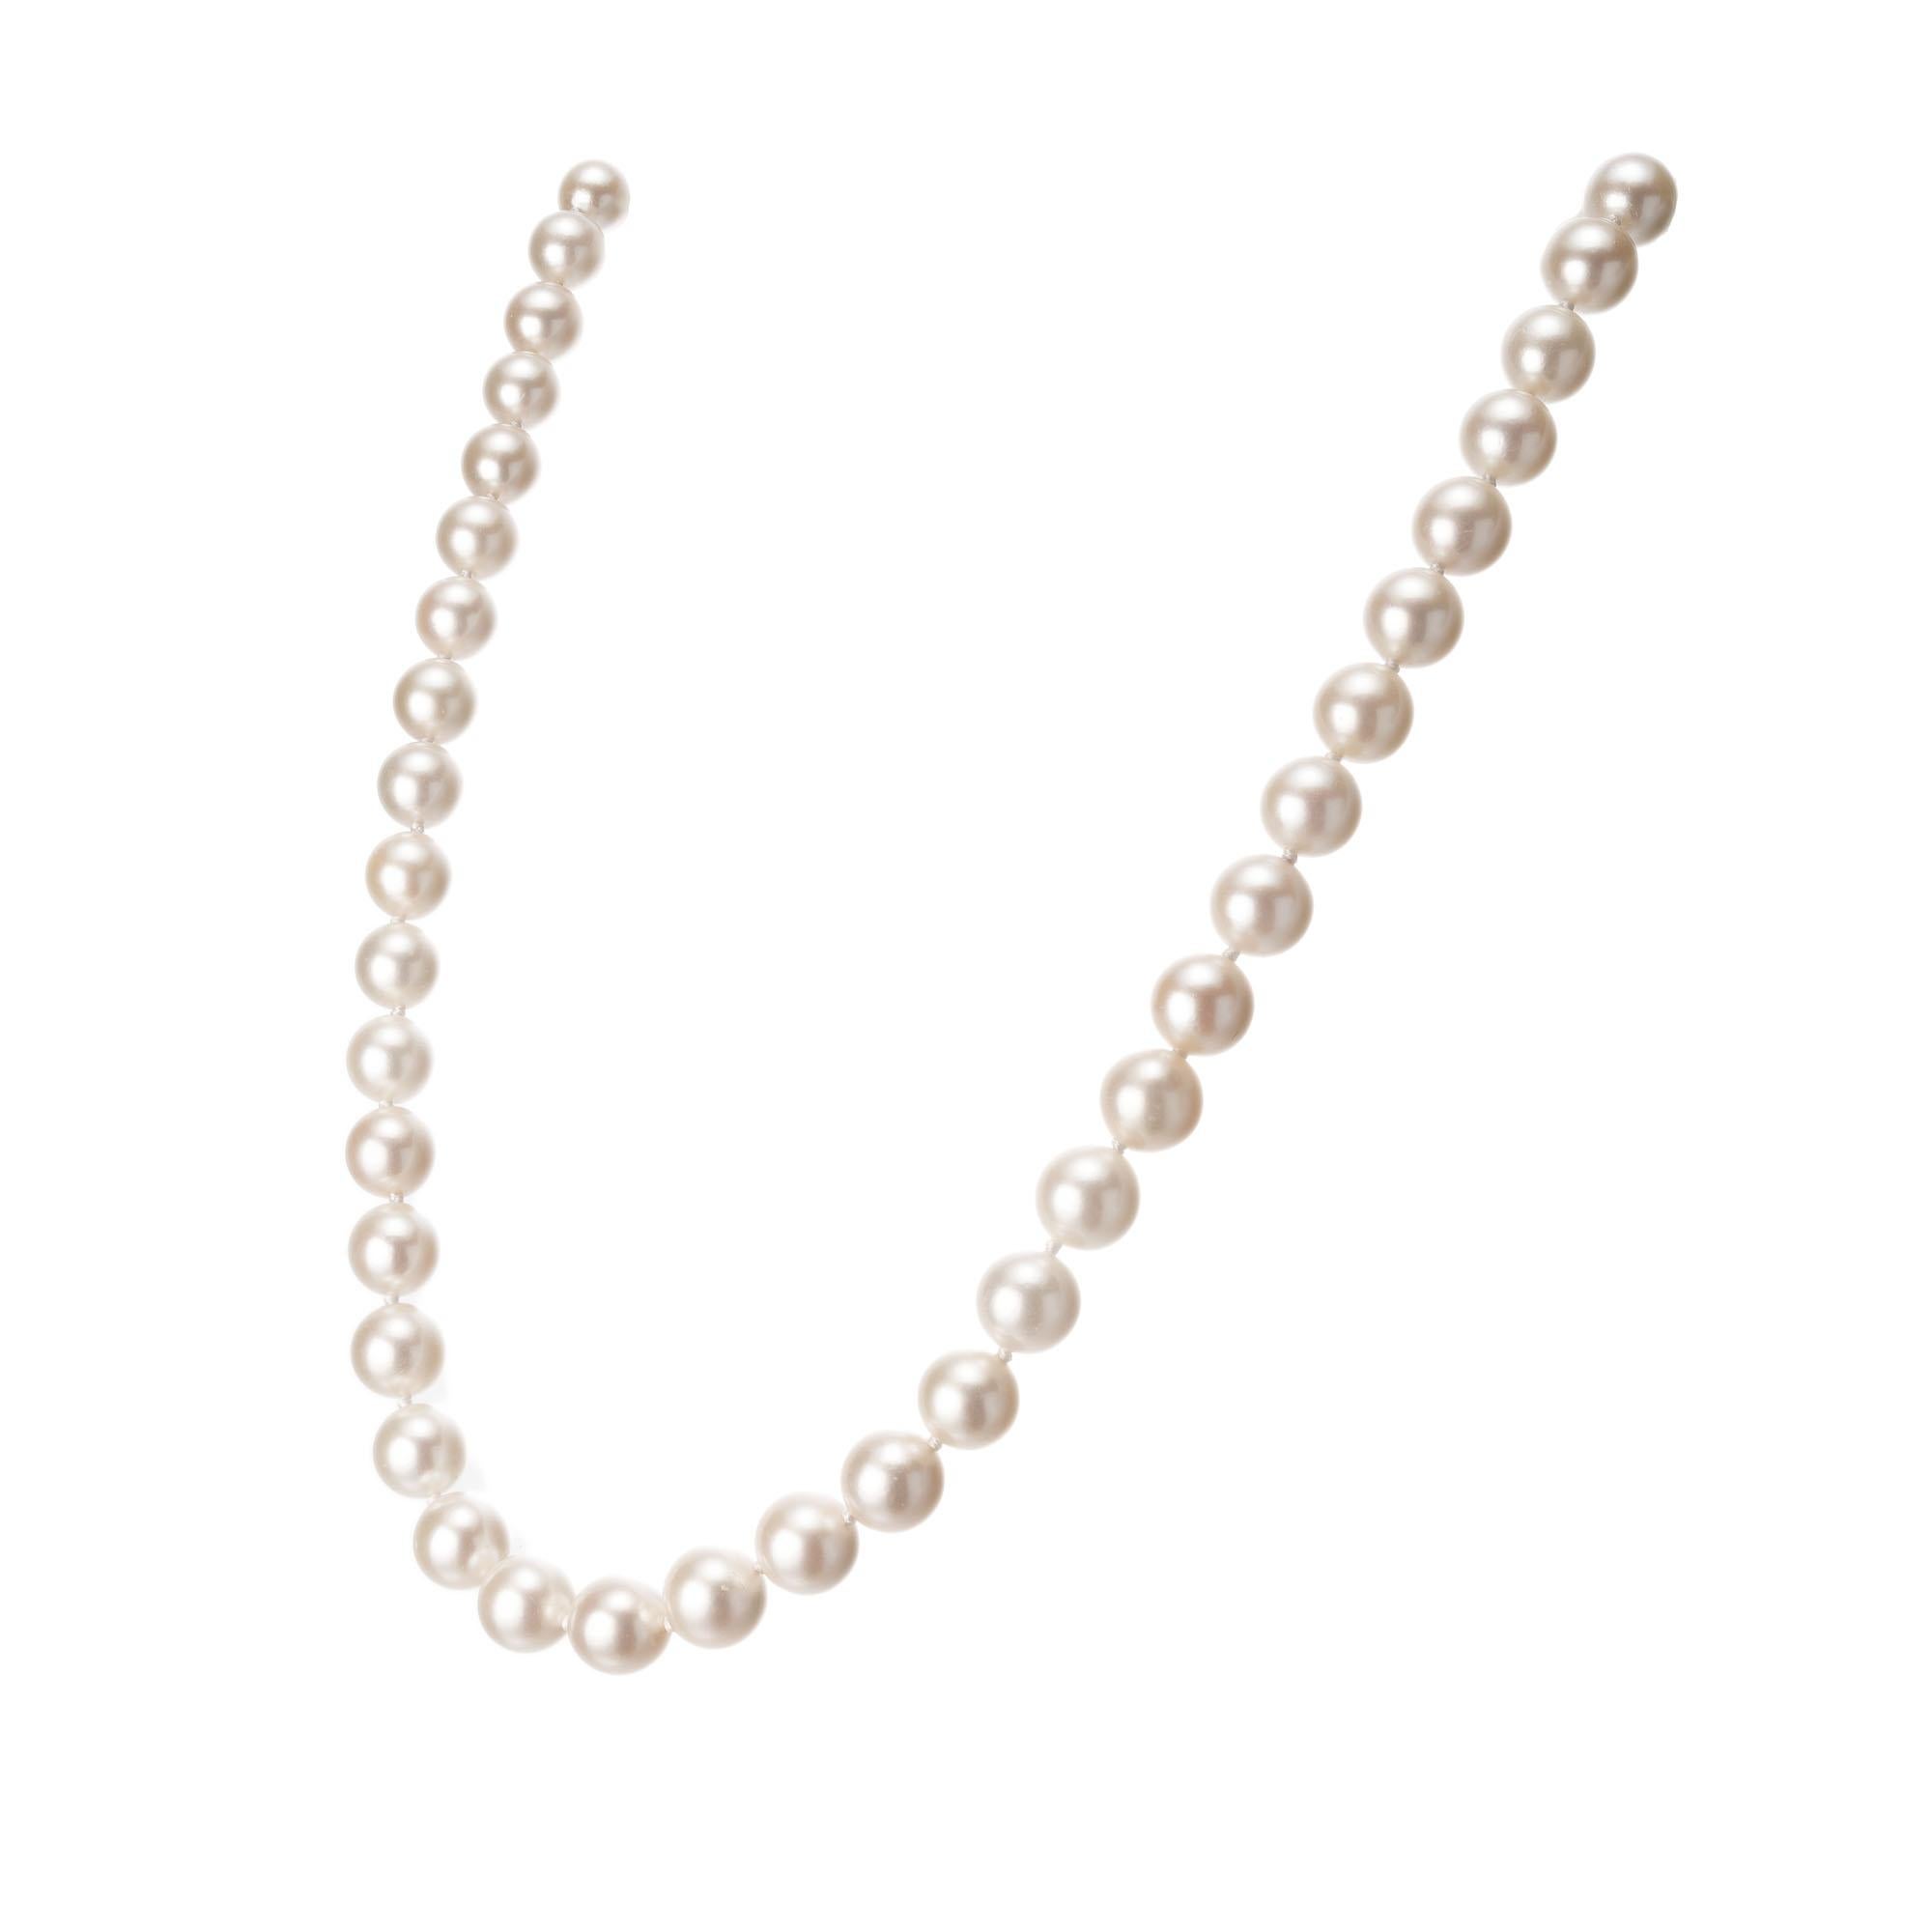 1970's 8.5mm, 18-Inch cultured pearl necklace with double sided 18k white gold diamond catch. Pearls are white light natural cream overtone well matched, good lustre, few blemishes. 18 inches long

47 cultured pearls 8.5mm
18 round brilliant cut